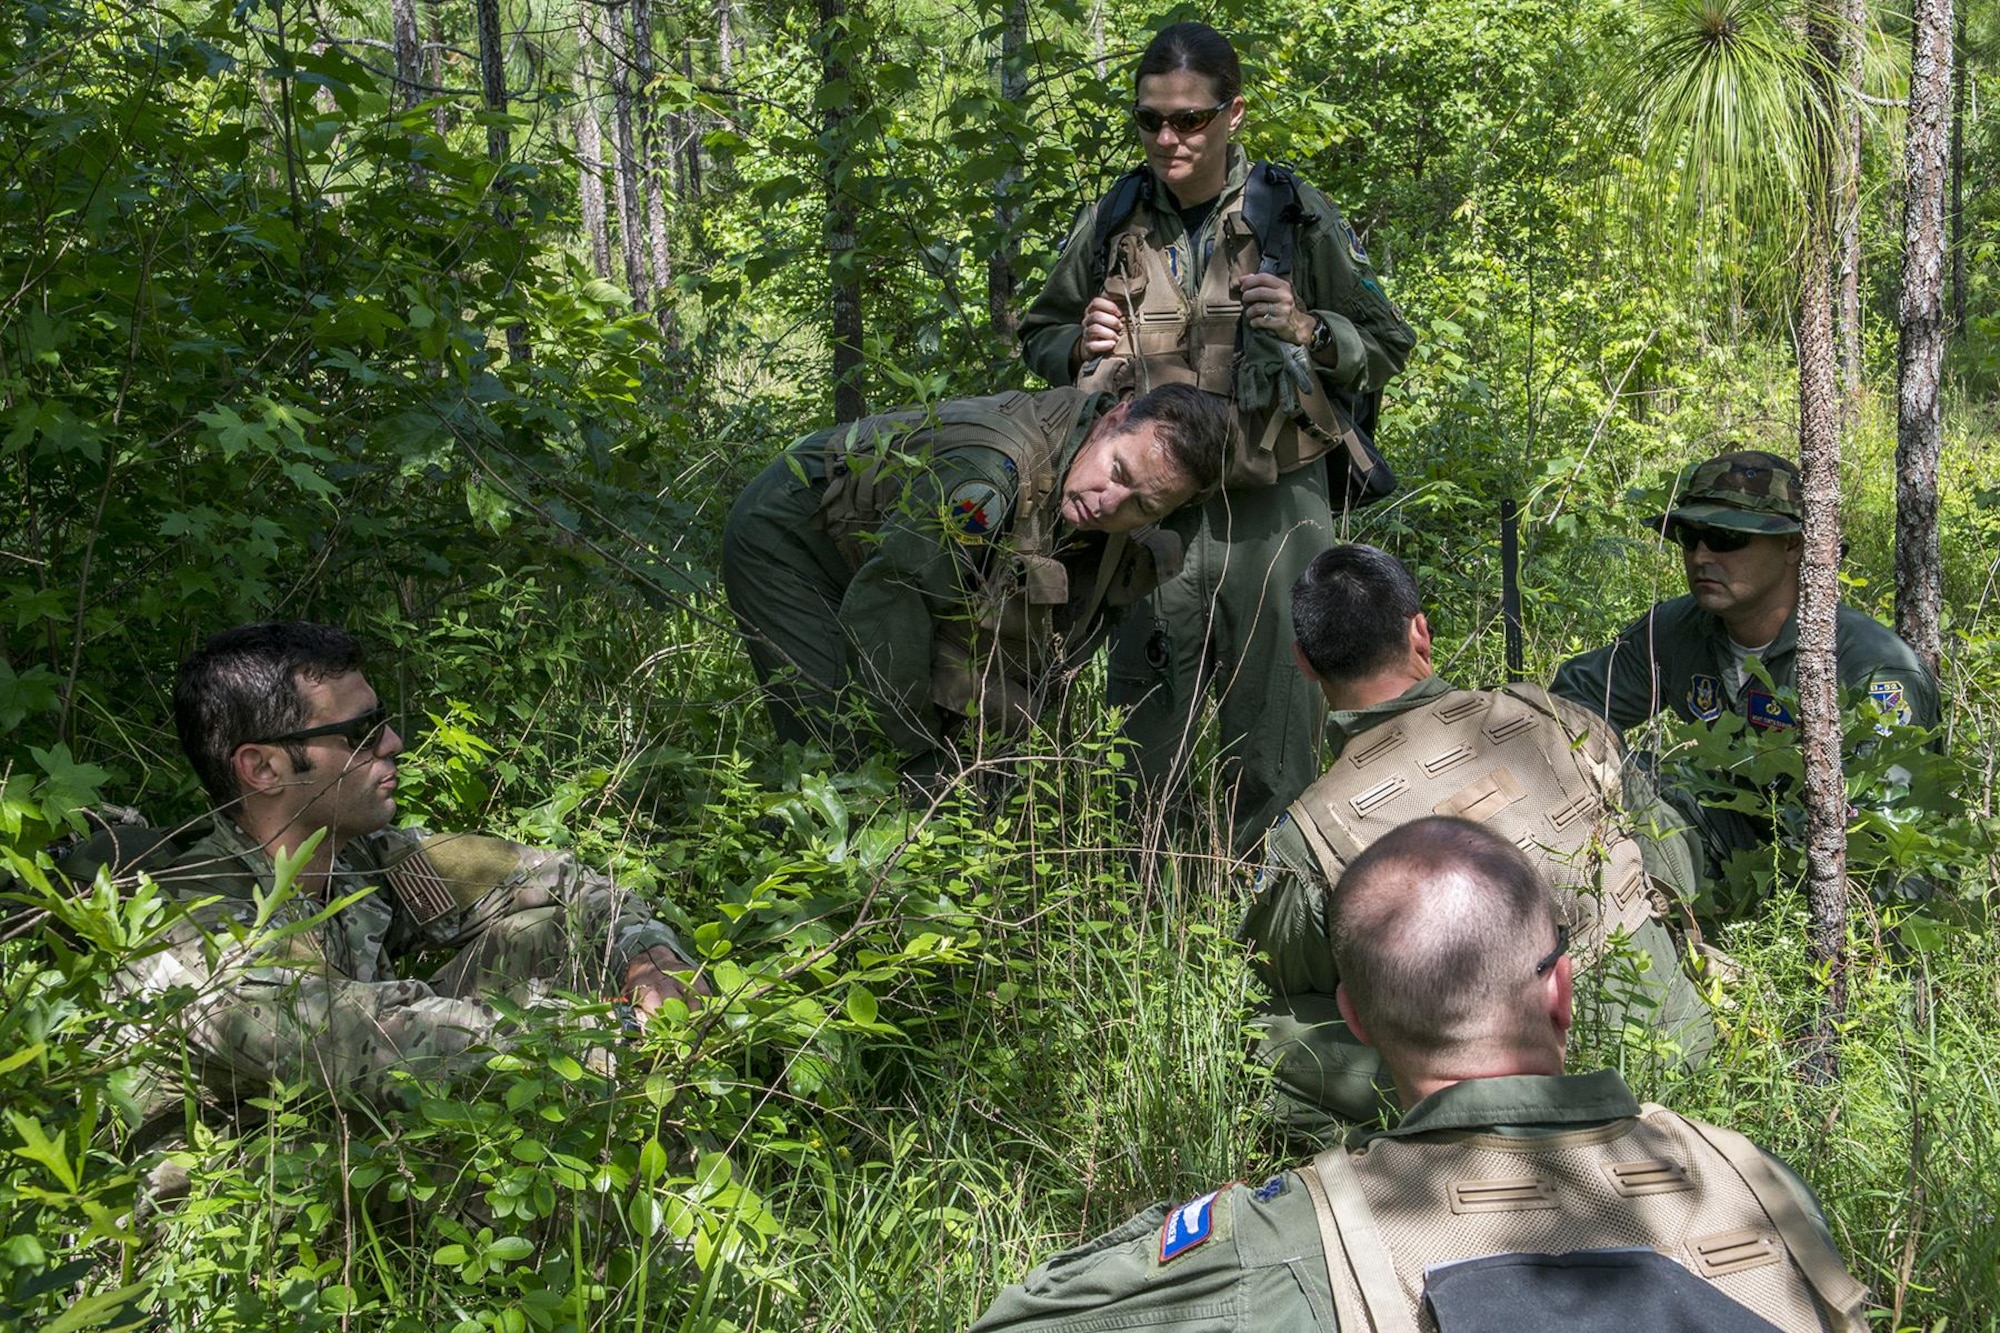 U.S. Air Force Staff Sgt. Matthew Mete, 2nd Operations Support Squadron SERE instructor, talks about survival and evasion techniques to a group of 93rd Bomb Squadron aircrew members during training on May 14, 2016, Claiborne Gunnery and Bombing Range, La. SERE, which stands for Survival, Evasion, Resistance and Escape, is required training for all aircrew members and provides the knowledge and tools necessary to survive on their own in any environment and under any condition should they have to abandon their aircraft. (U.S. Air Force photo by Master Sgt. Greg Steele/Released)